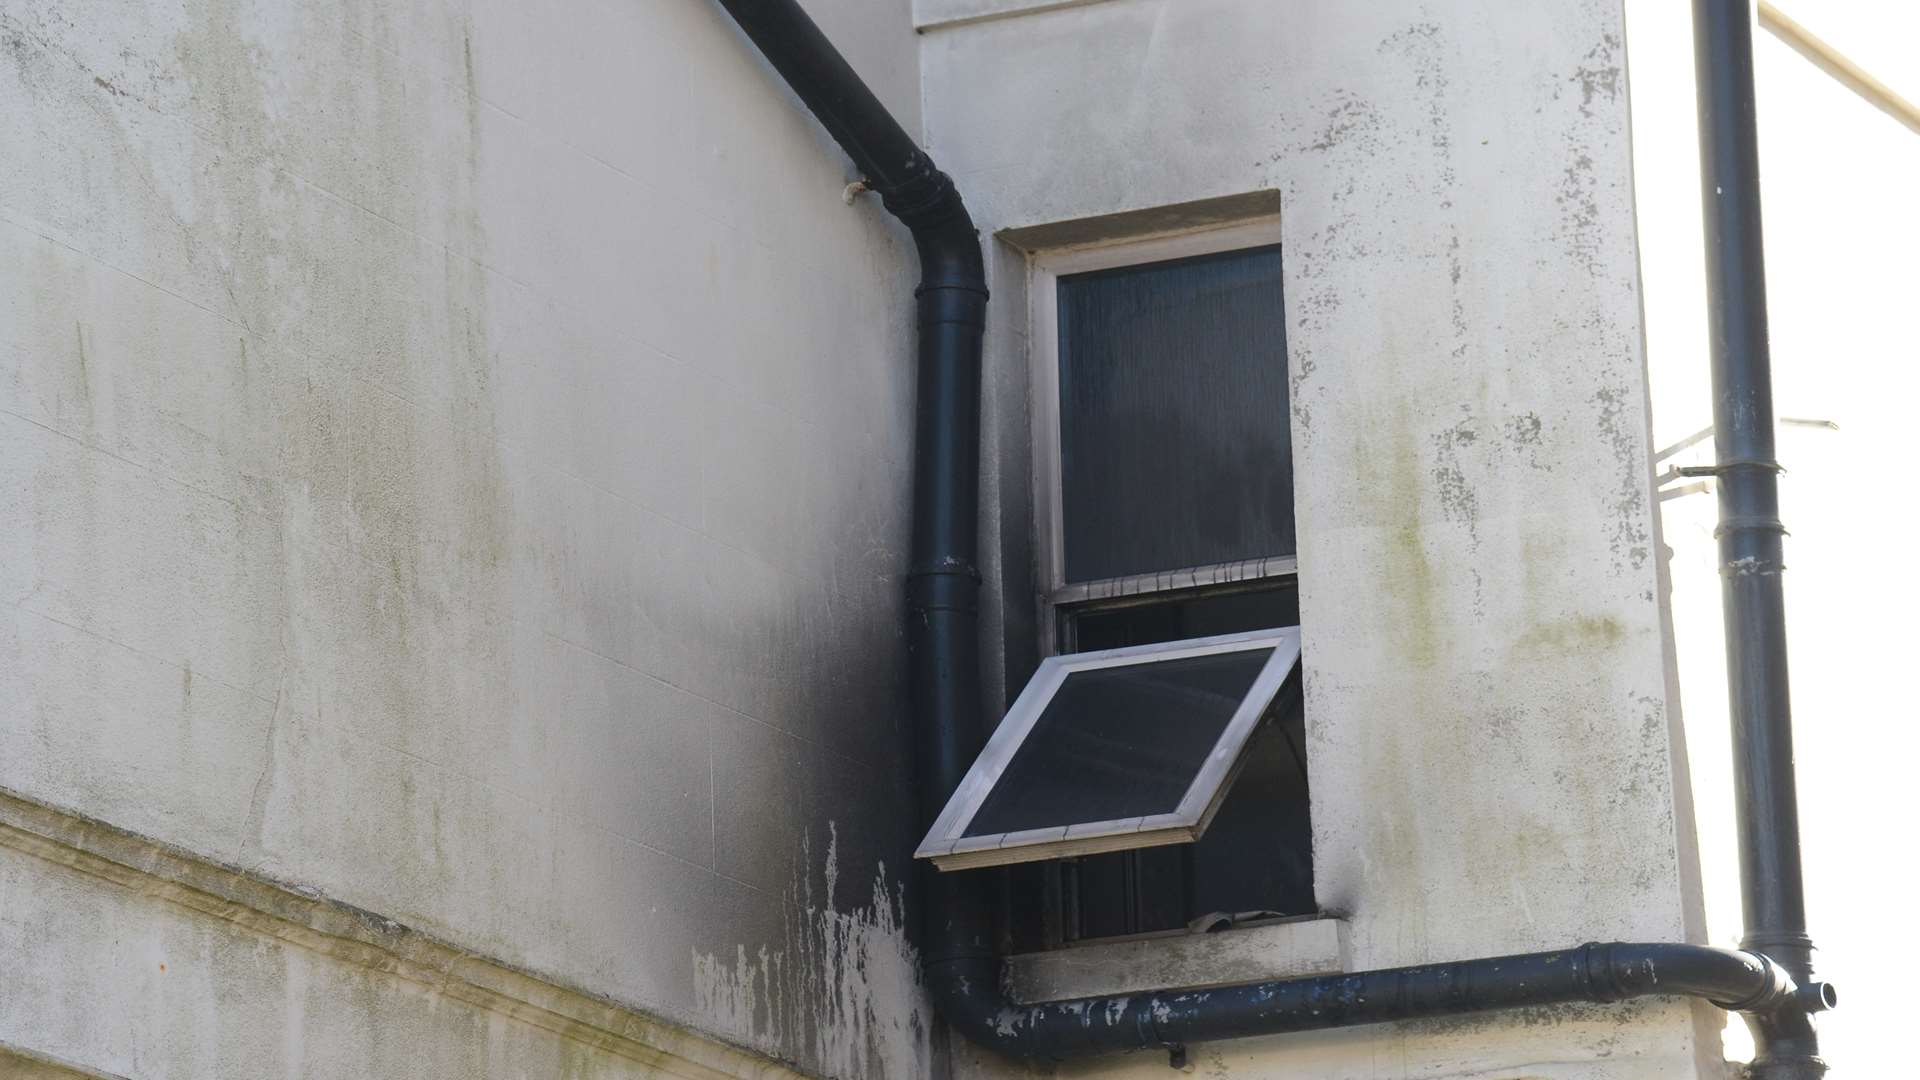 A burnt out window at the rear of the building. Picture: Gary Browne